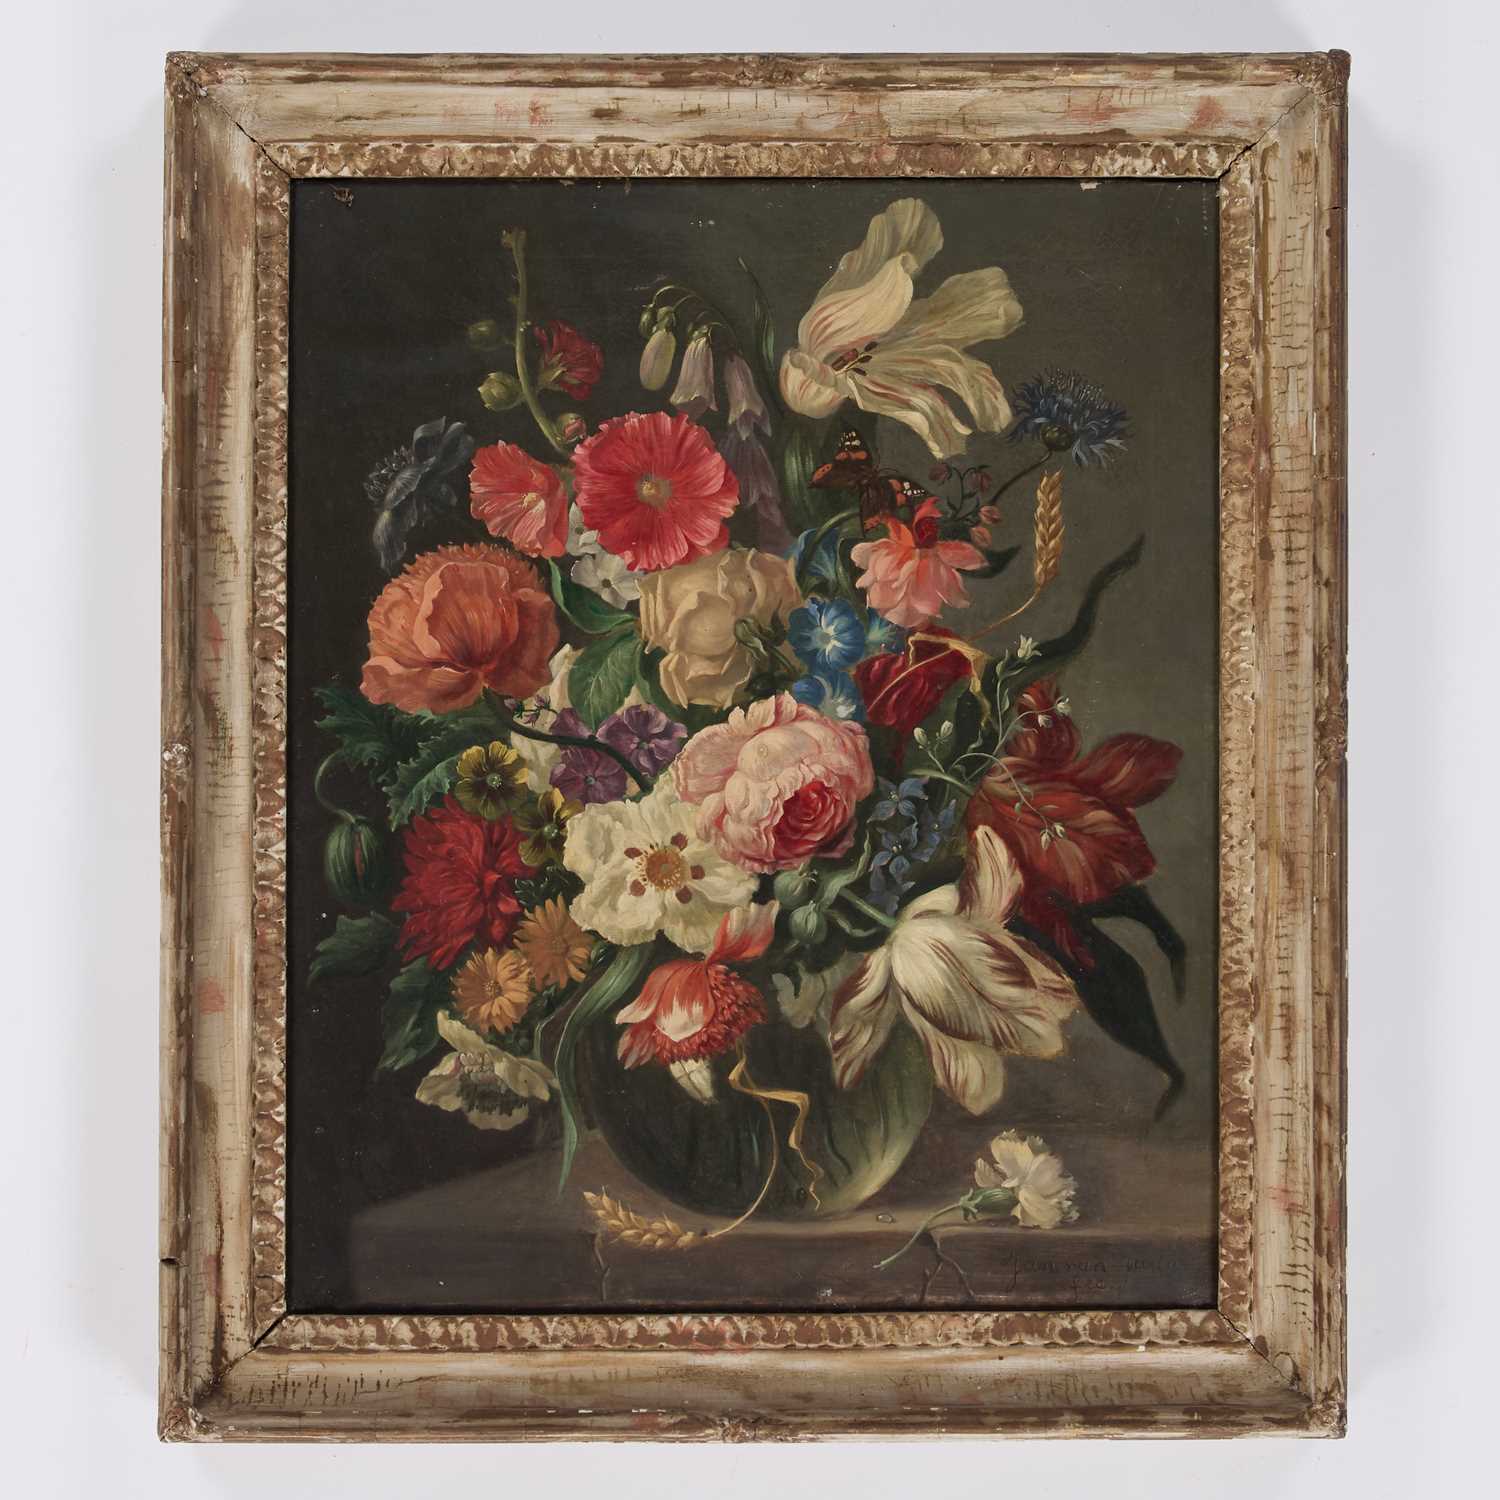 19TH CENTURY EUROPEAN SCHOOL IN THE 17TH CENTURY STYLE STILL LIFE OF FLOWERS IN A VASE - Image 2 of 3